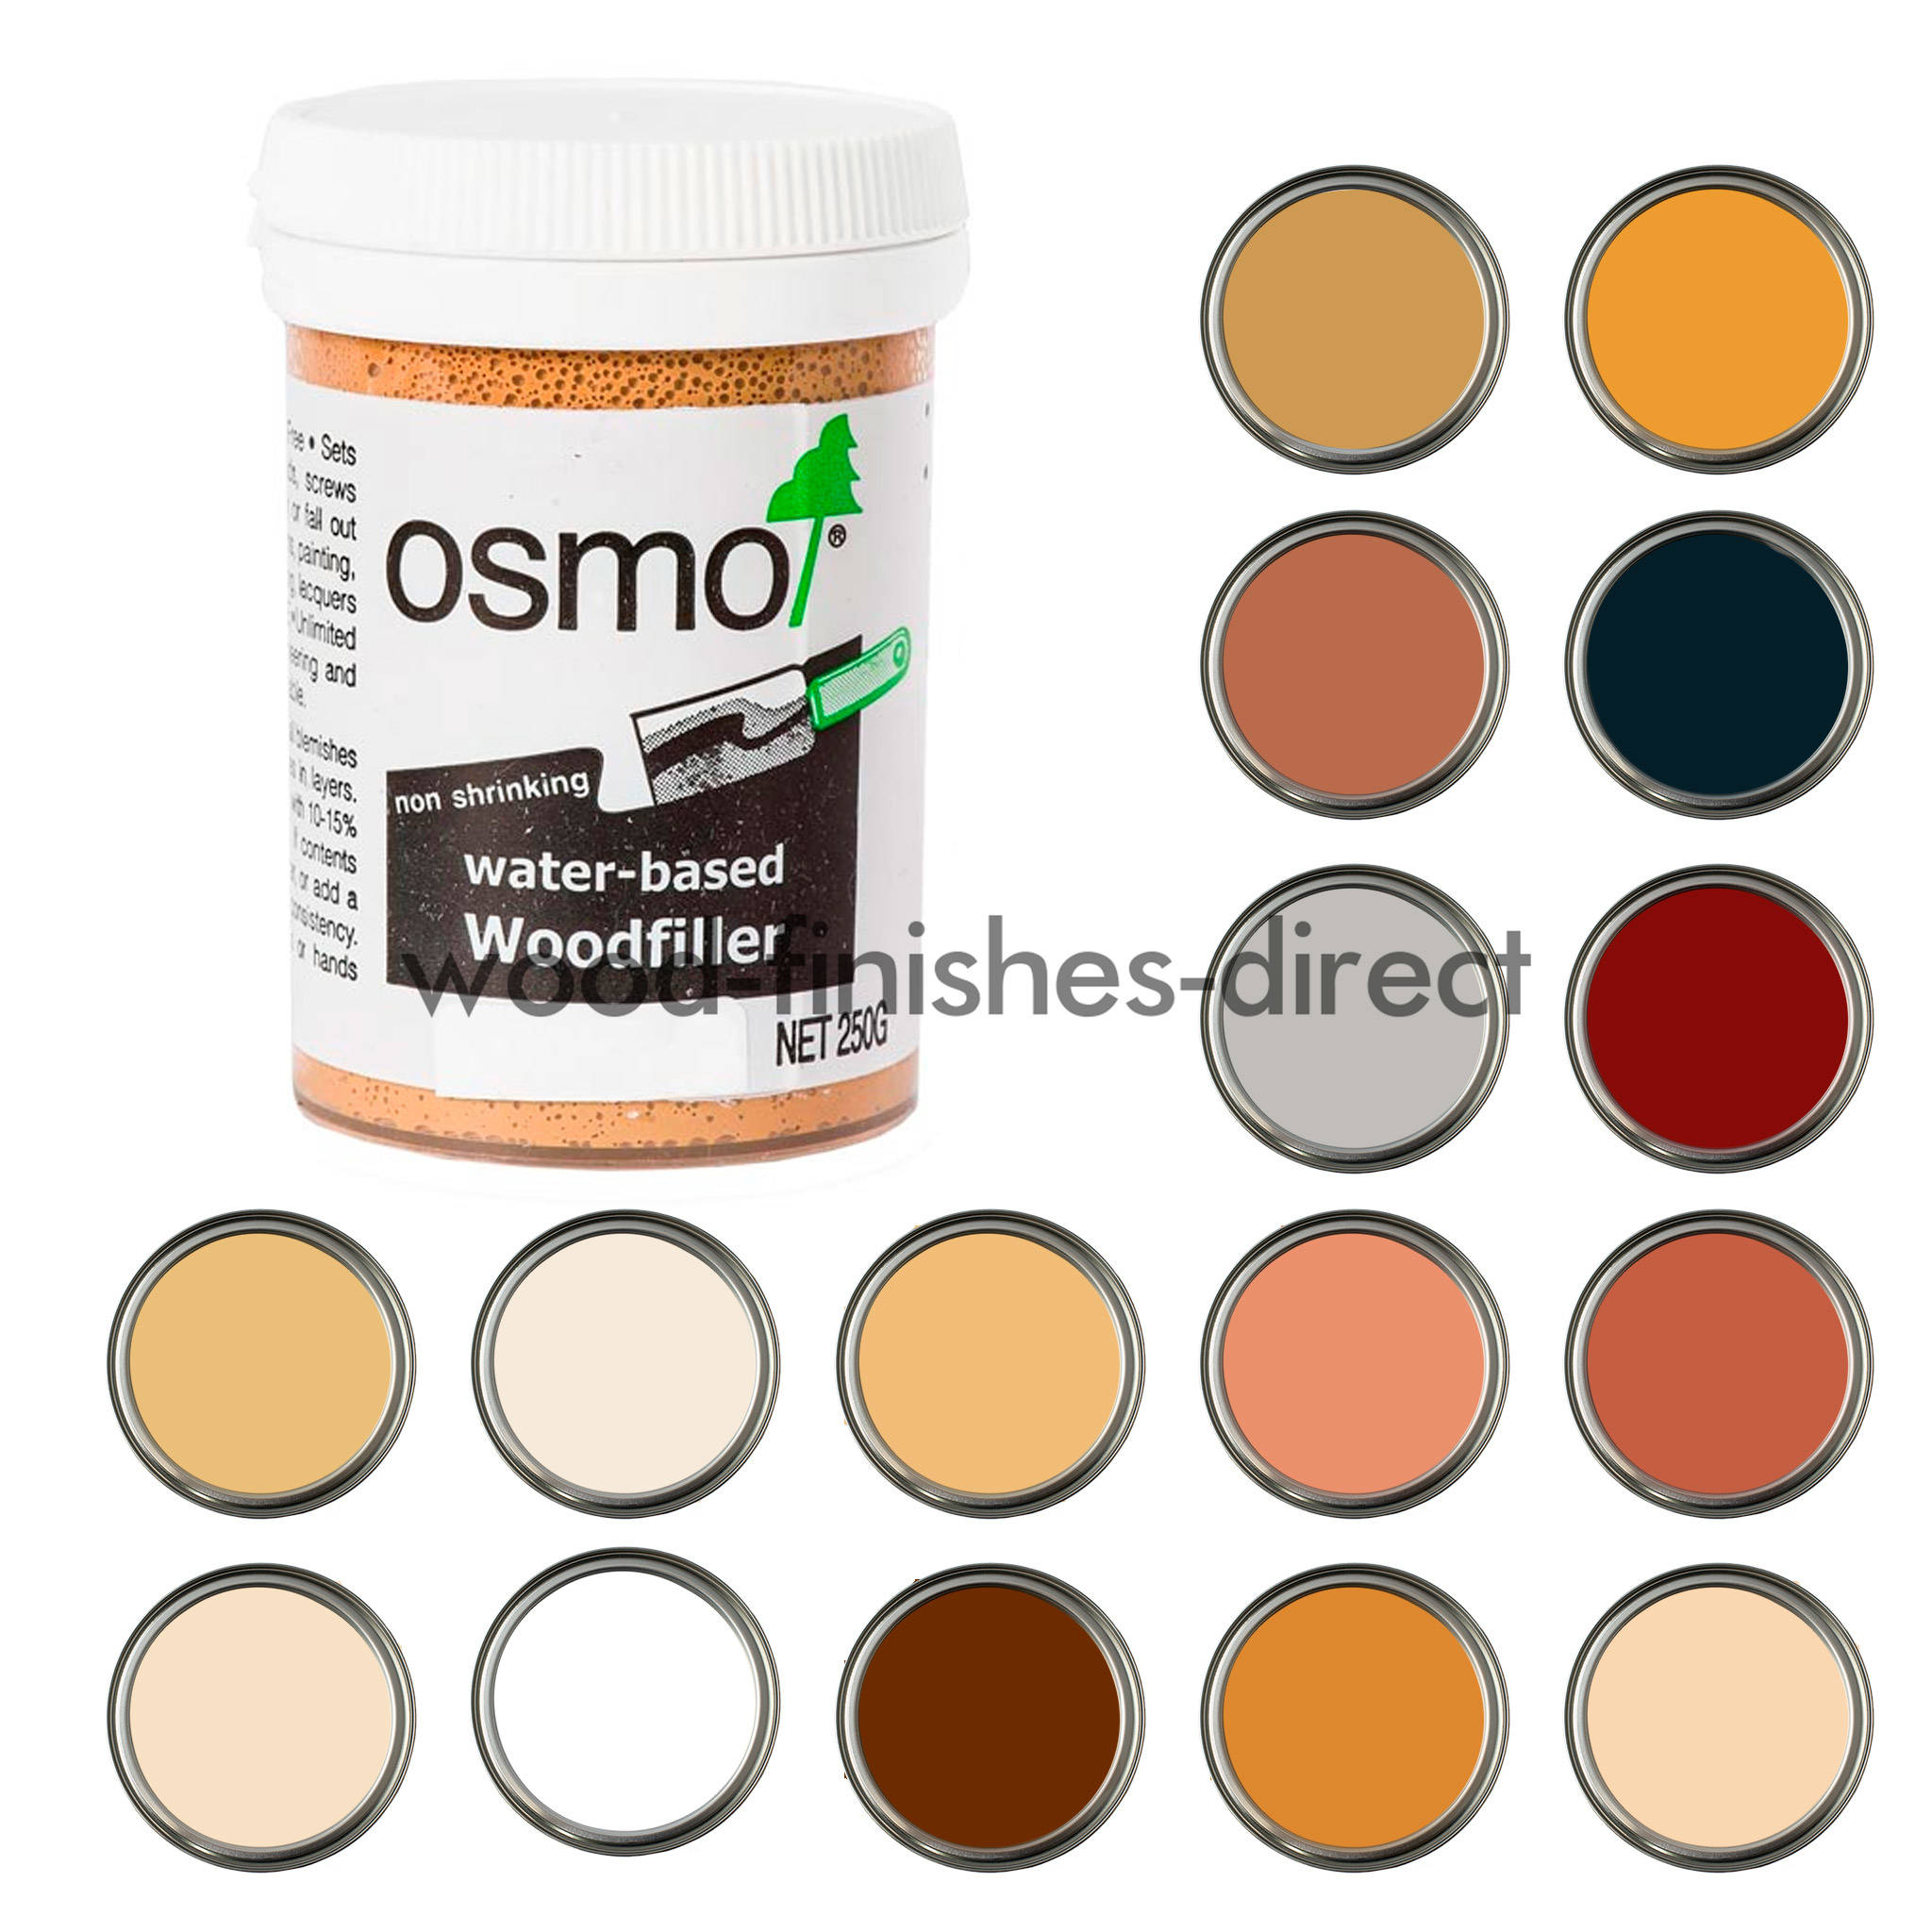 Details About Osmo Interior Wood Filler 100g 250g Free Delivery